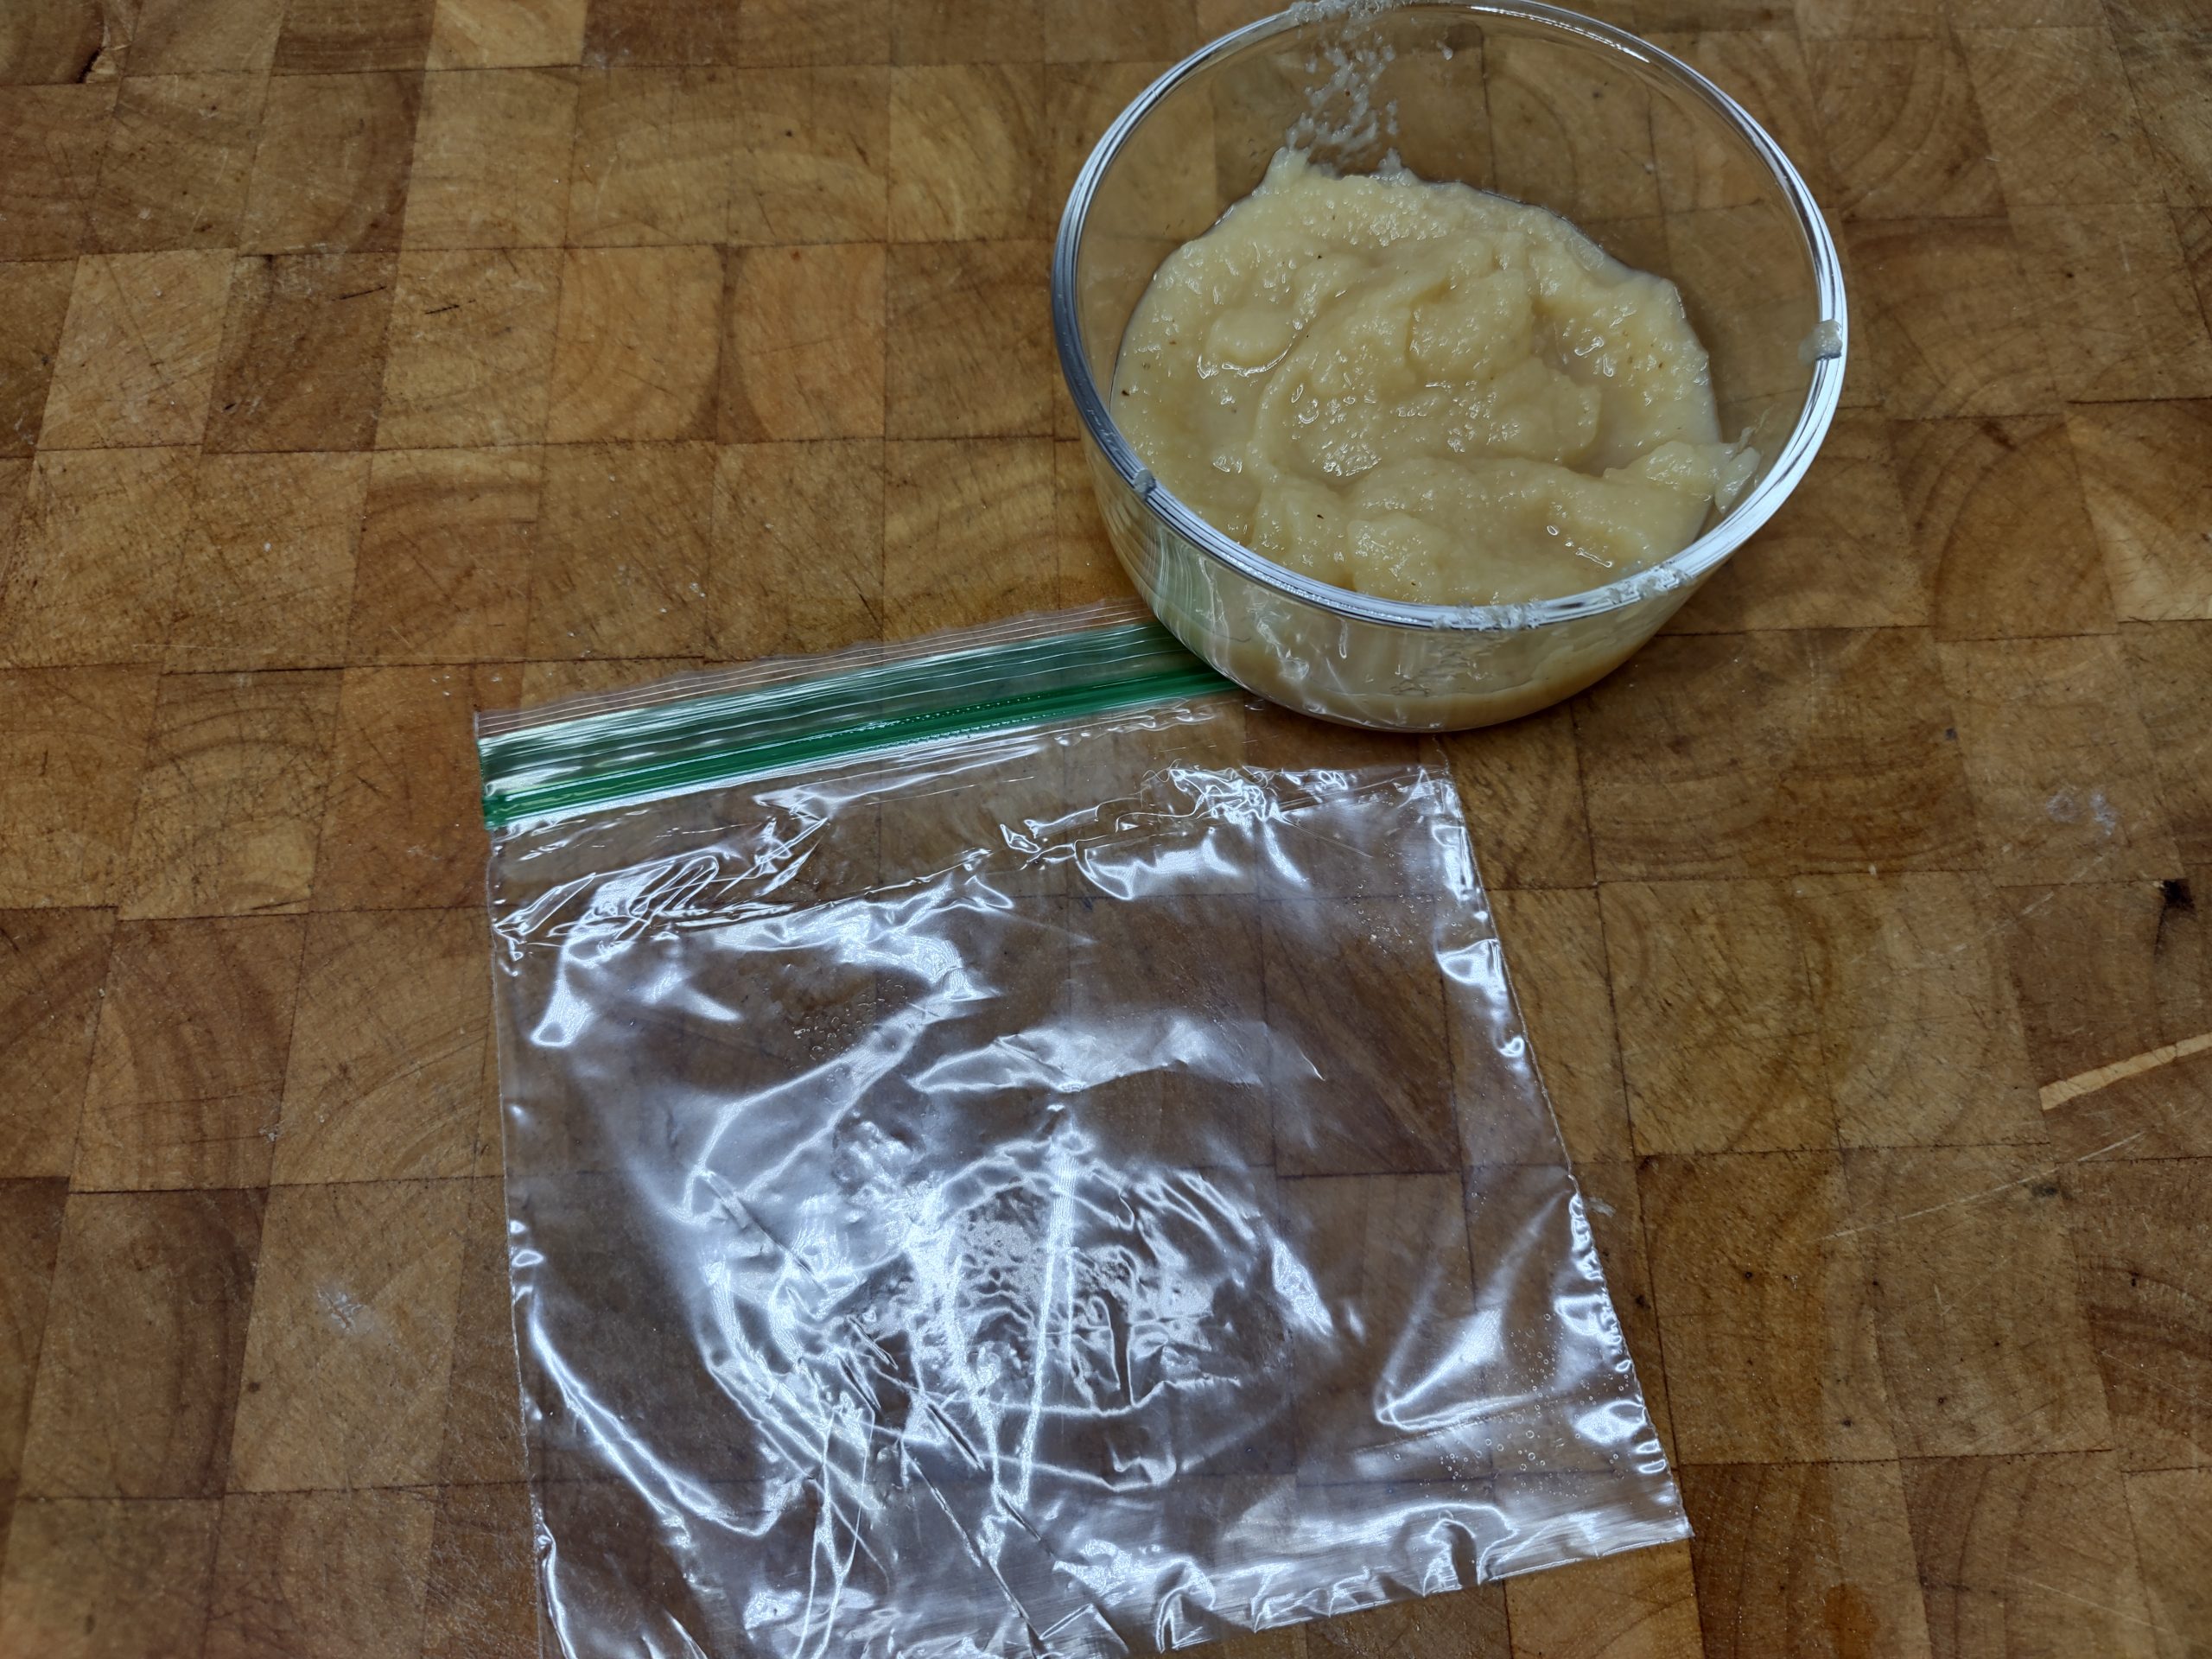 bowl of applesauce sitting next to an empty freezer bag on a wooden table